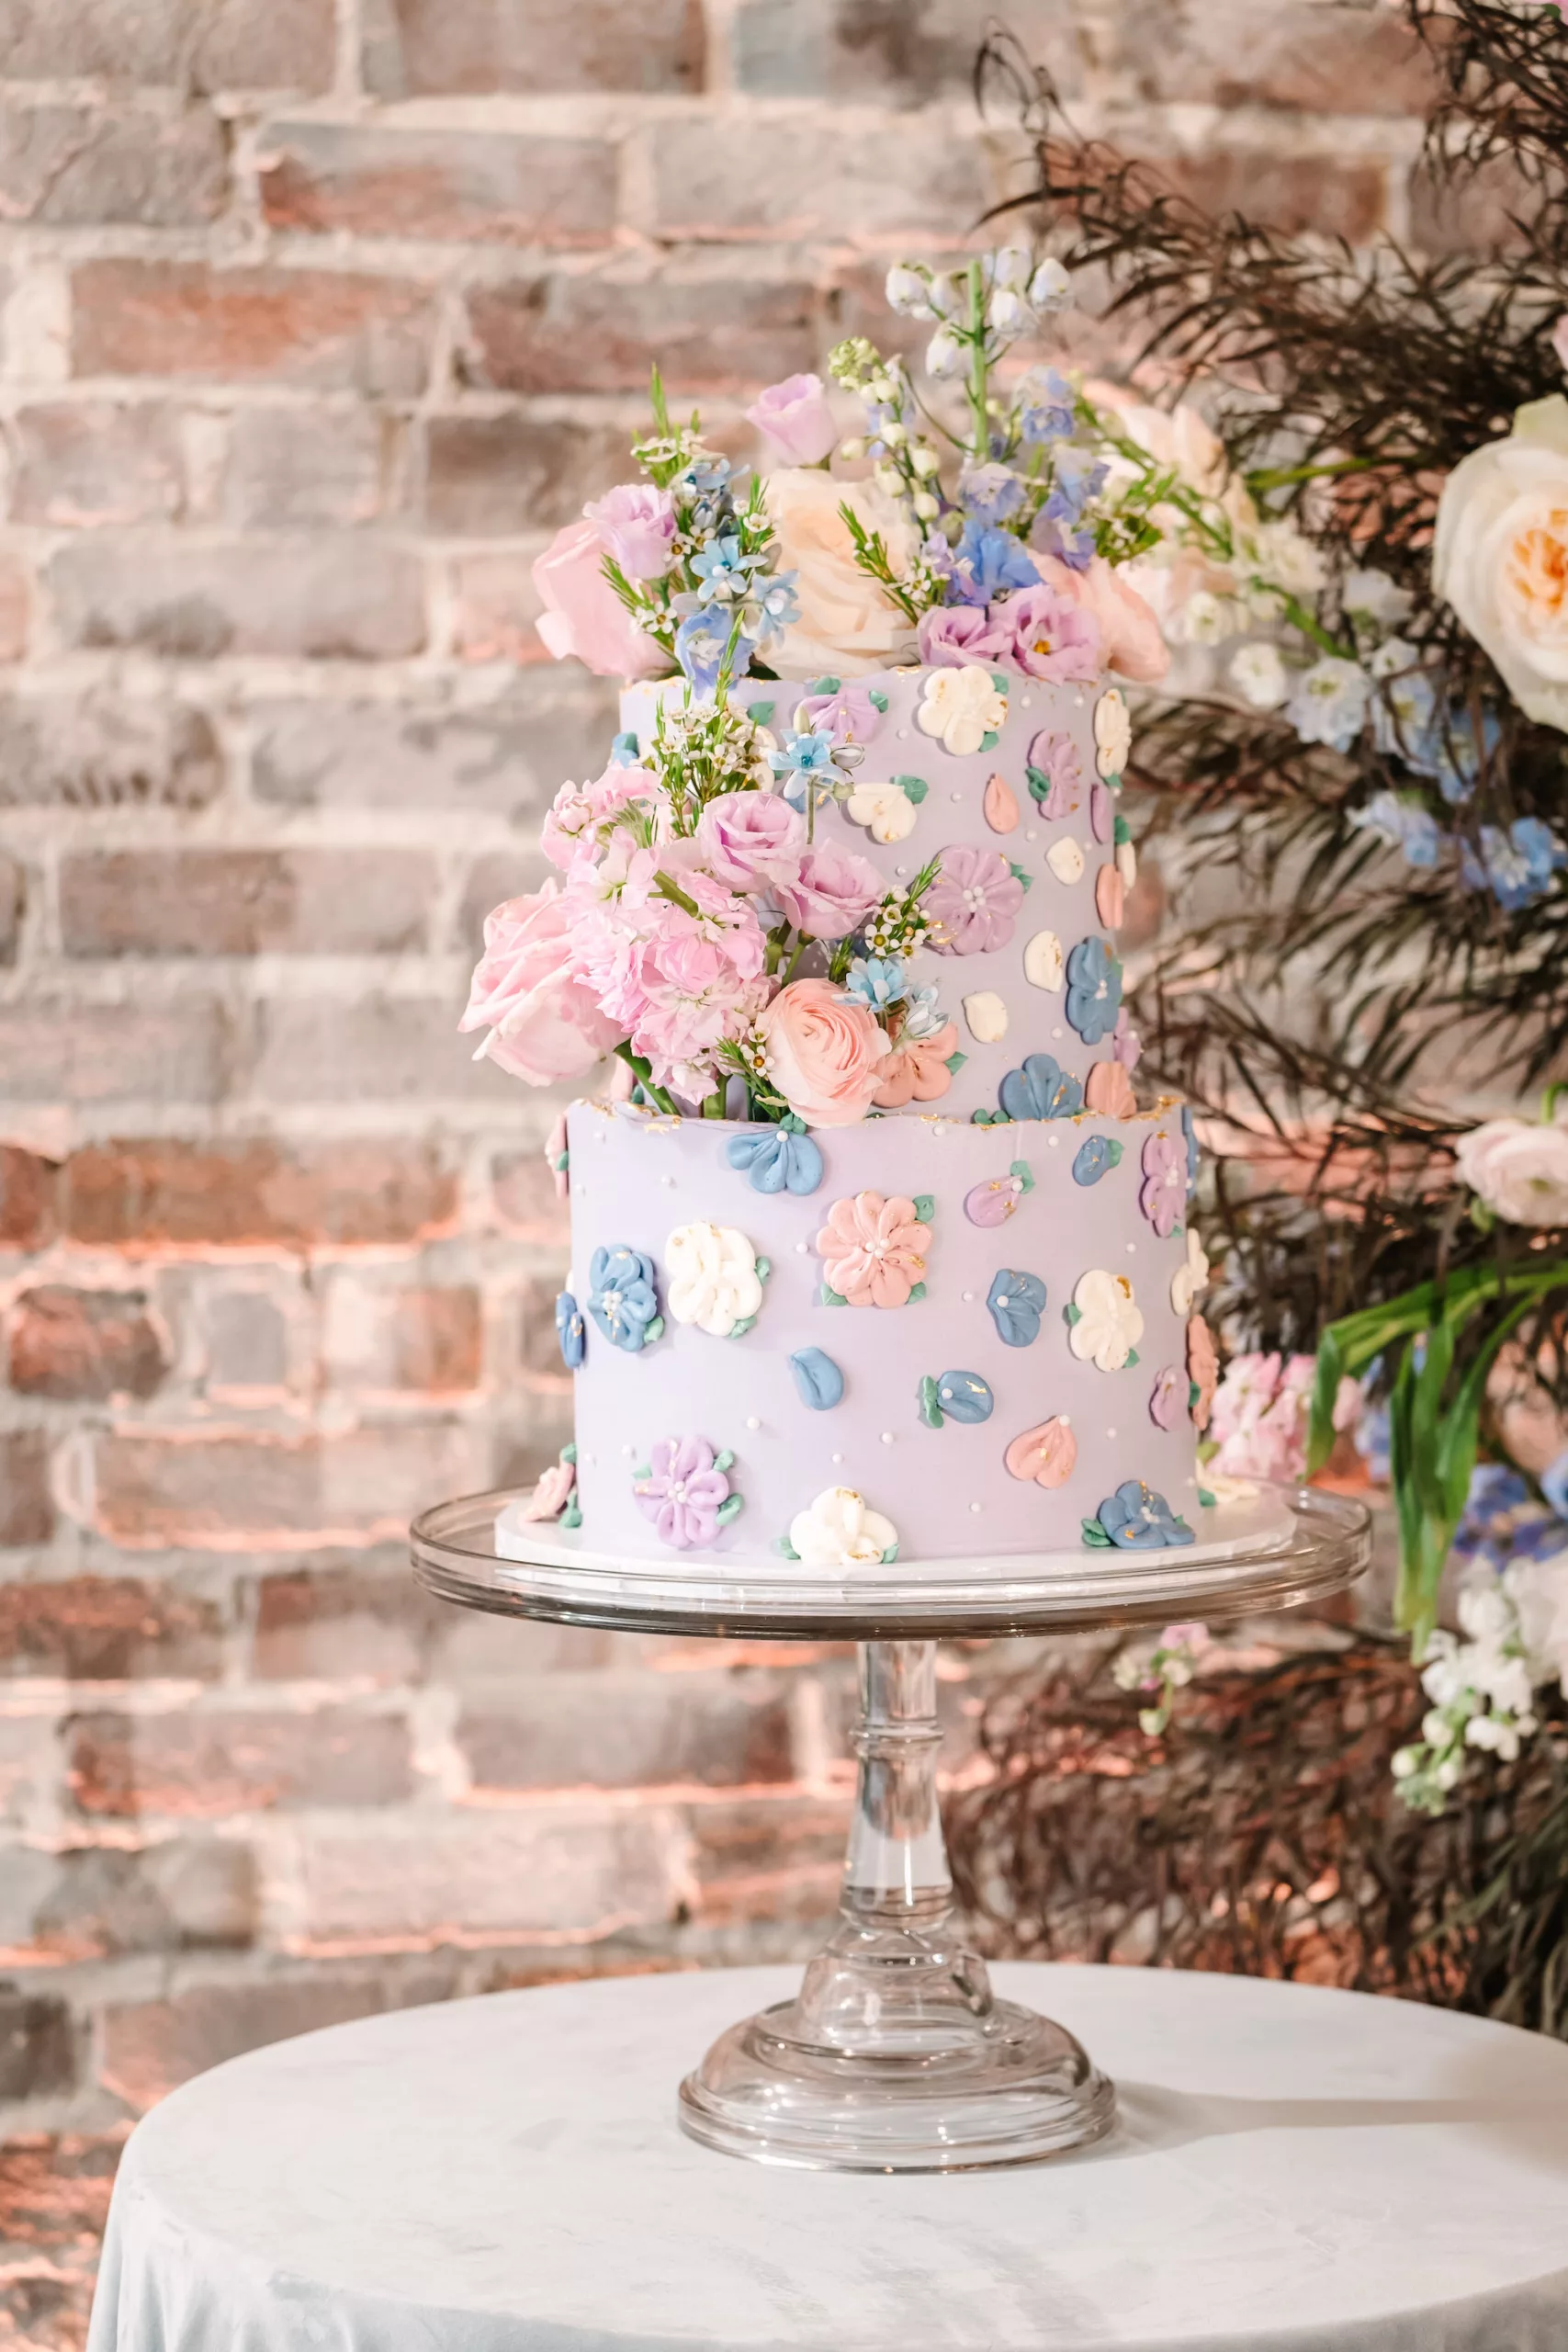 Whimsical Lavender Purple Wedding Cake with Pink, Purple, and Blue Frosting Fowers